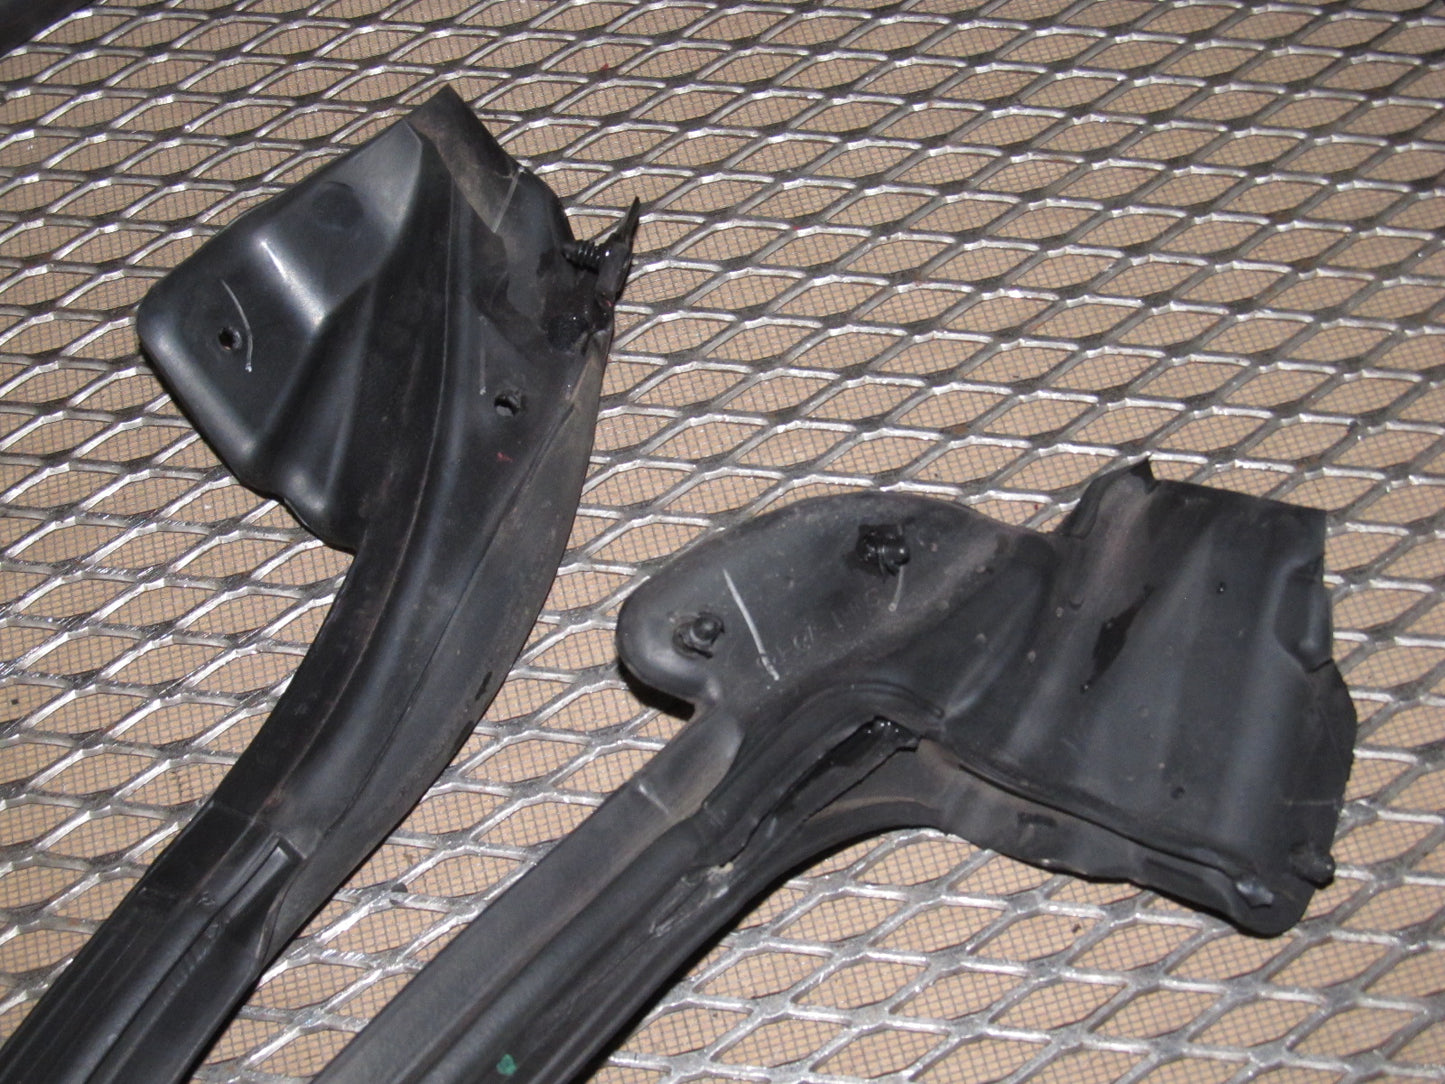 99-04 Ford Mustang OEM Door Weather Stripping Rubber Seal - Right